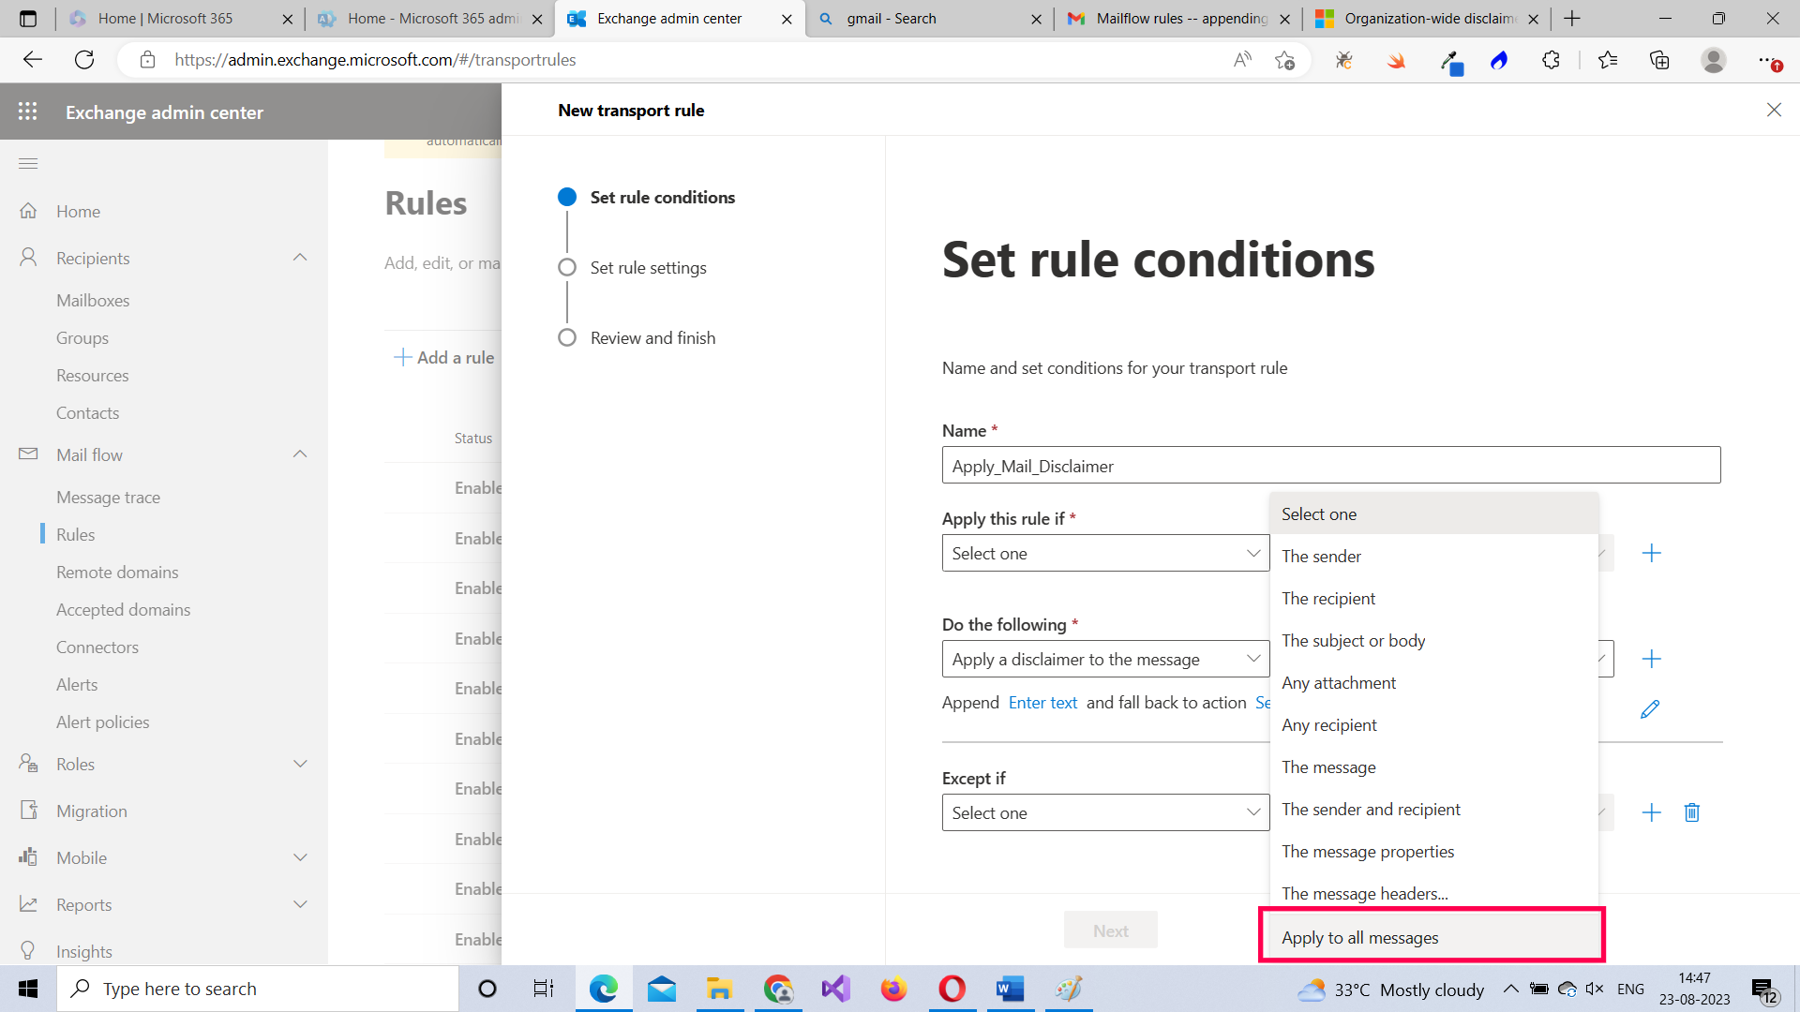 This screenshot shows how you can select and apply a condition for the mail flow rule you are setting up.